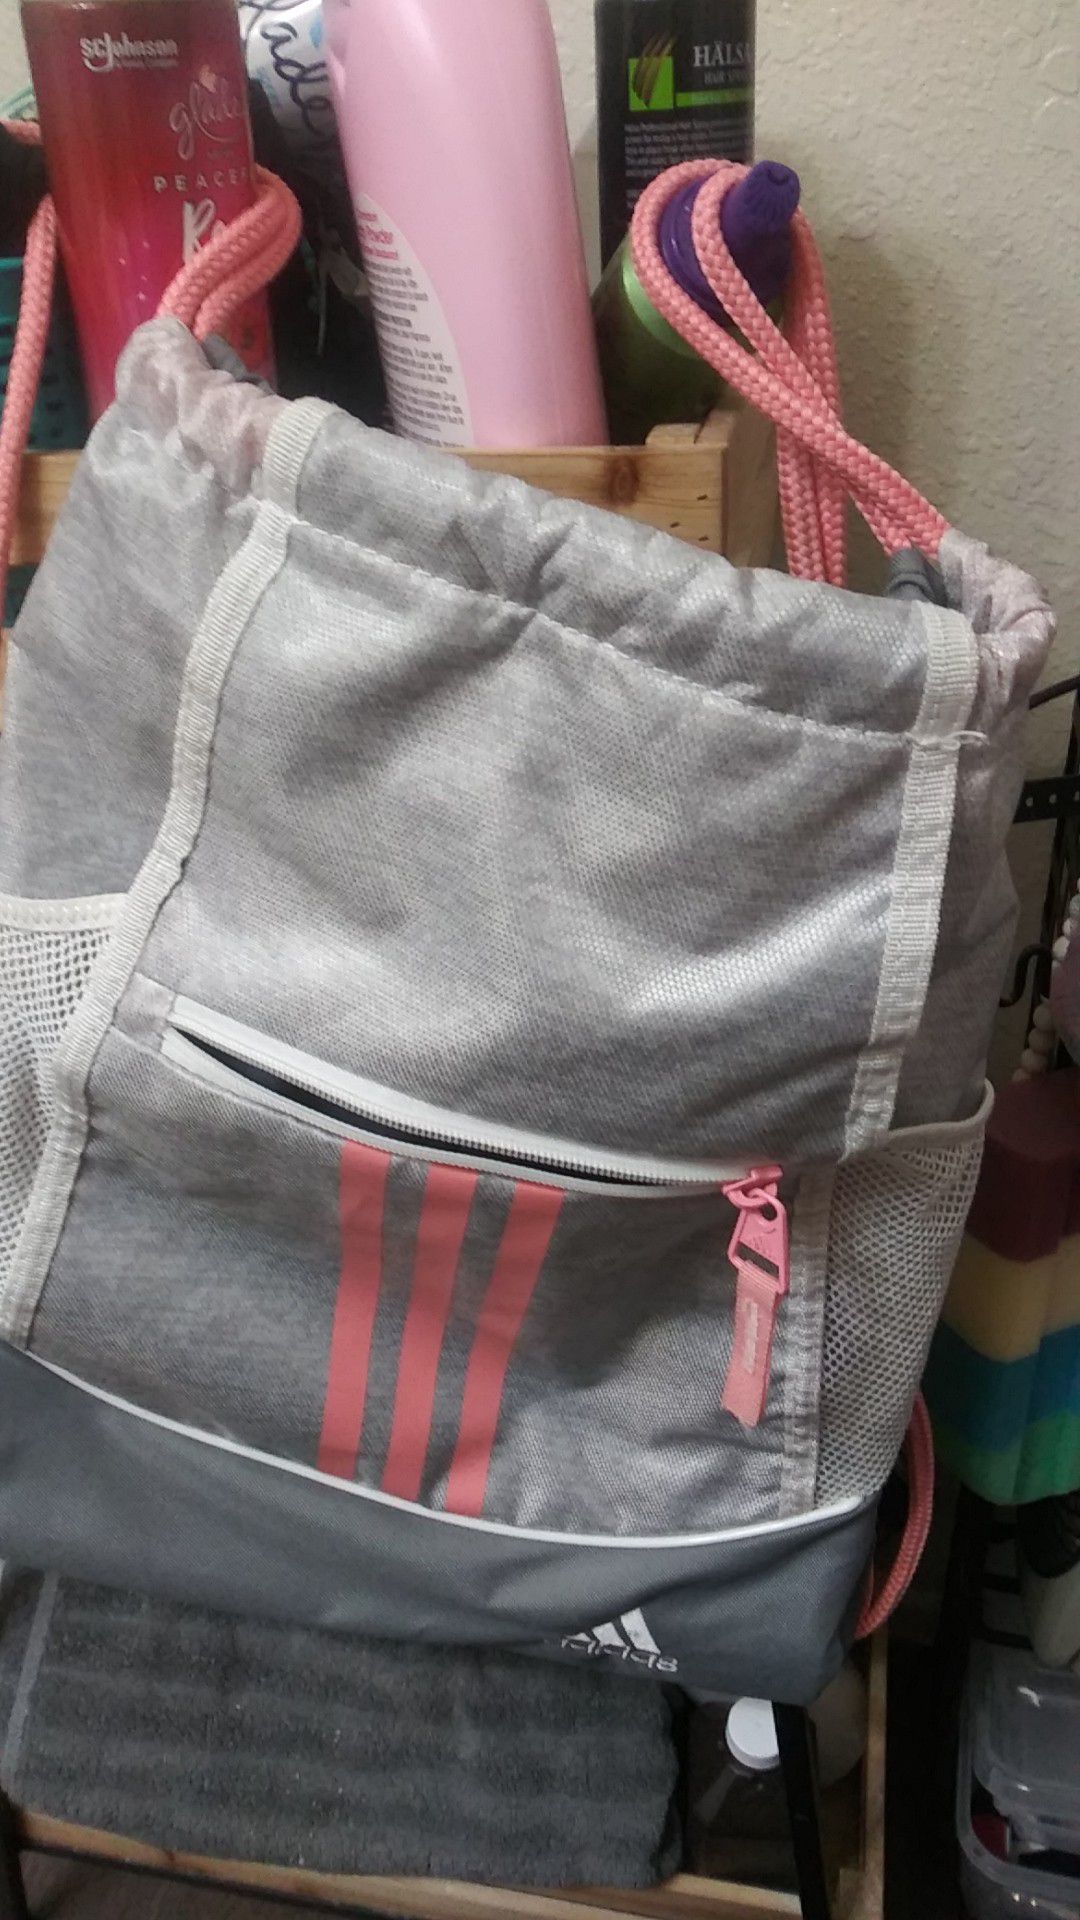 Adidas brand new backpack